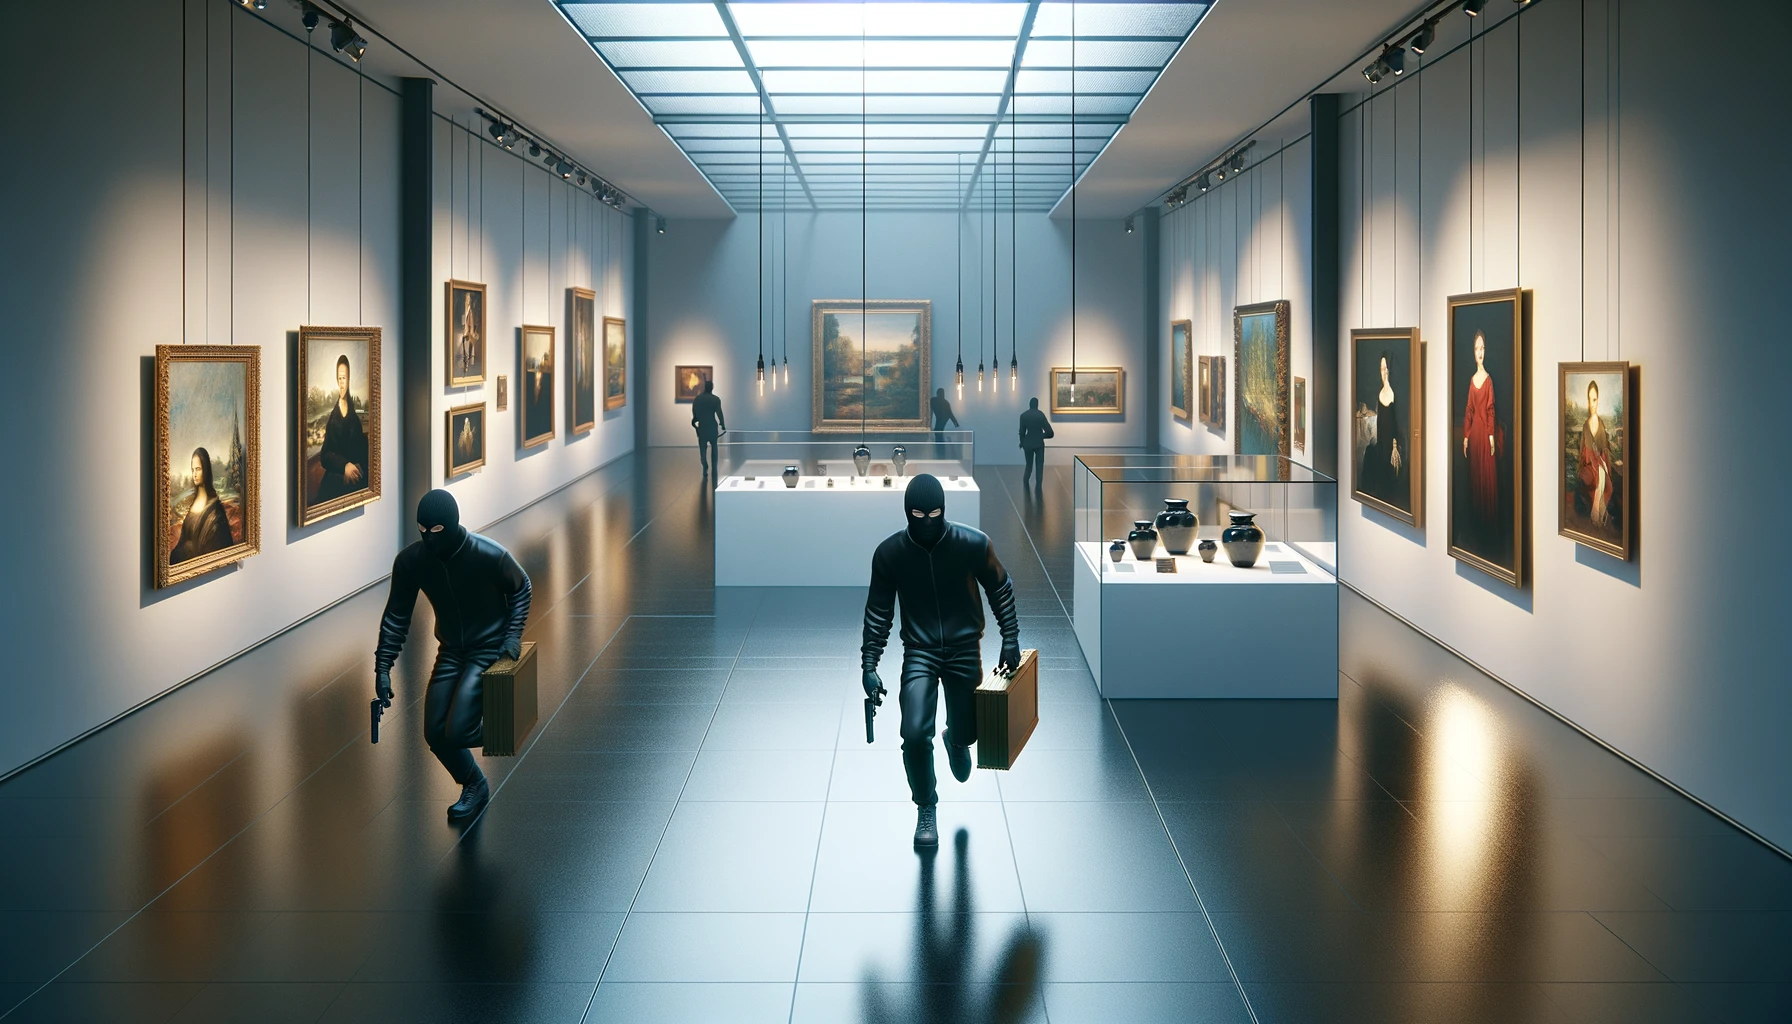 The Kunsthal Museum Art Theft (2012)